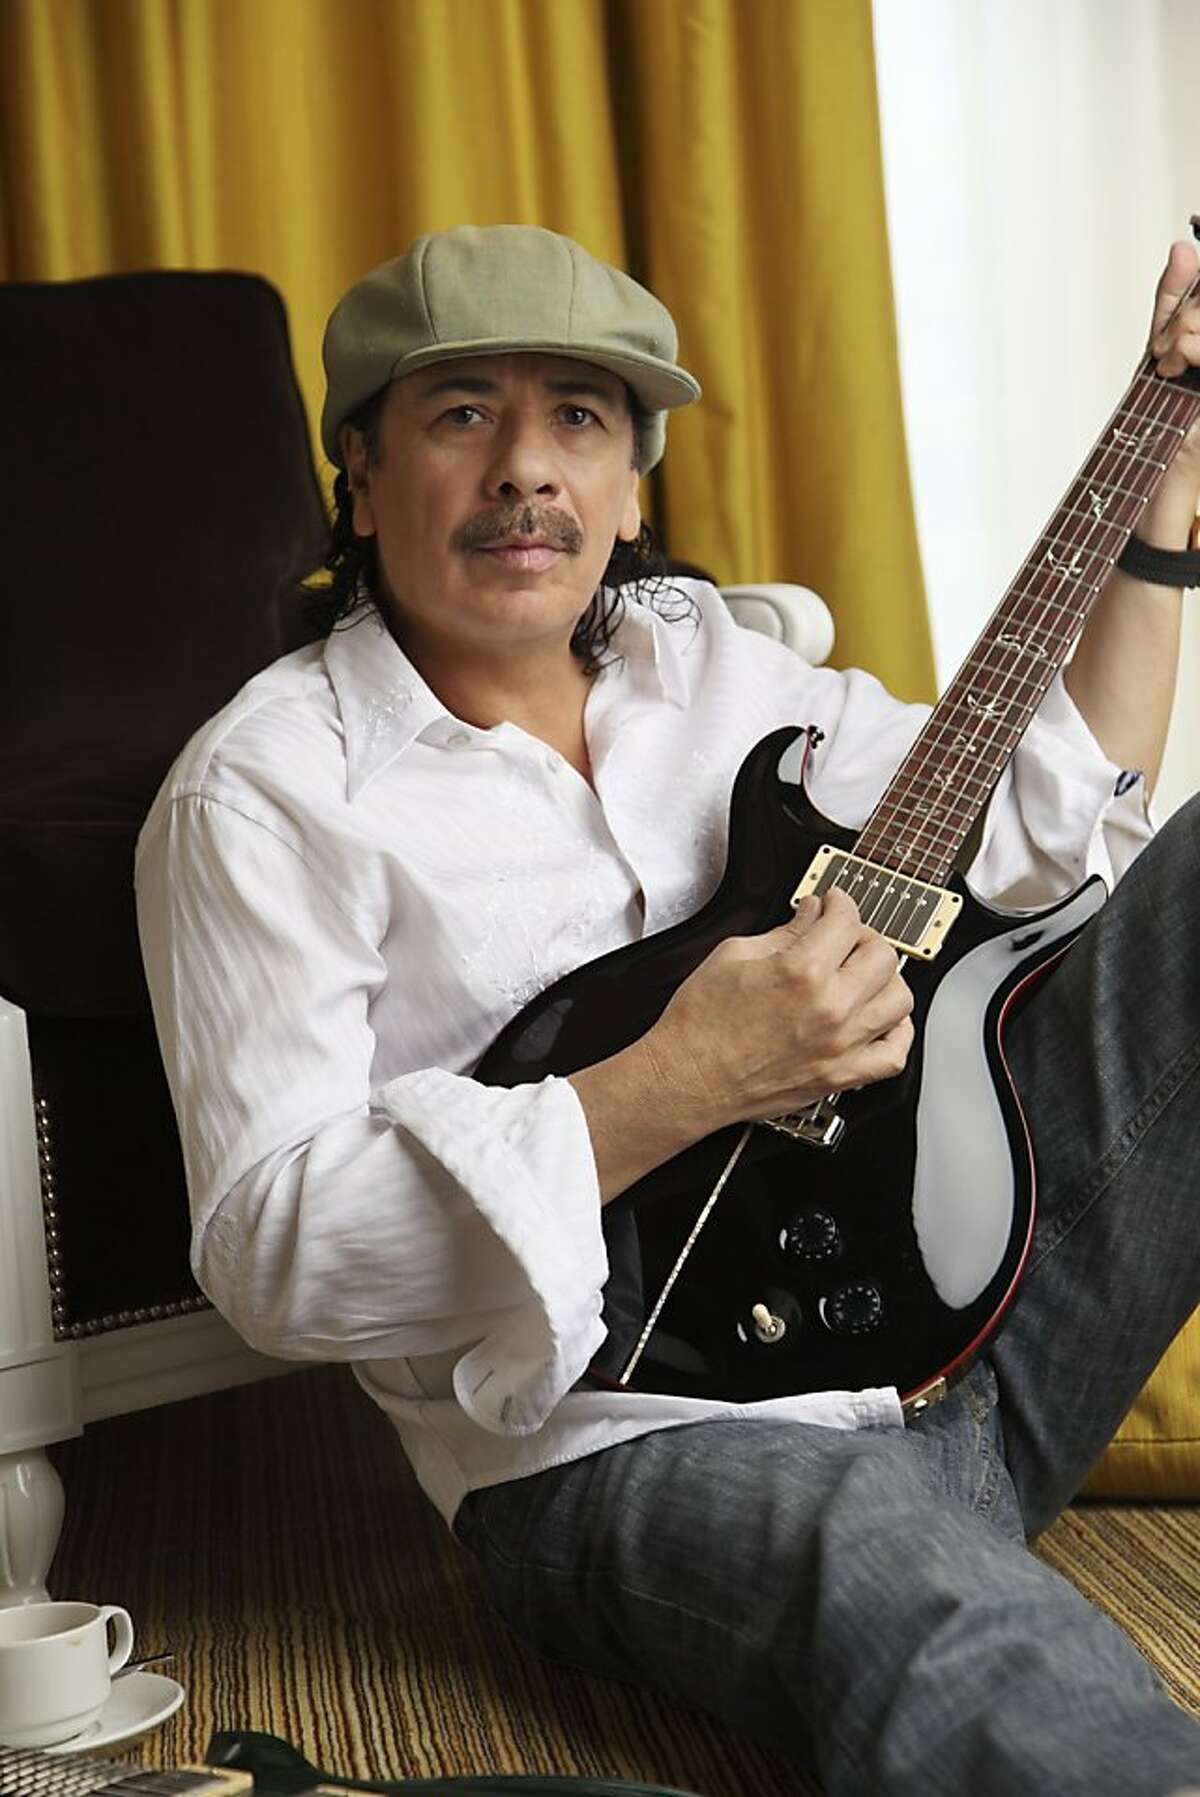 Carlos Santana will perform with the Oakland East Bay Symphony in the orchestra's season opener